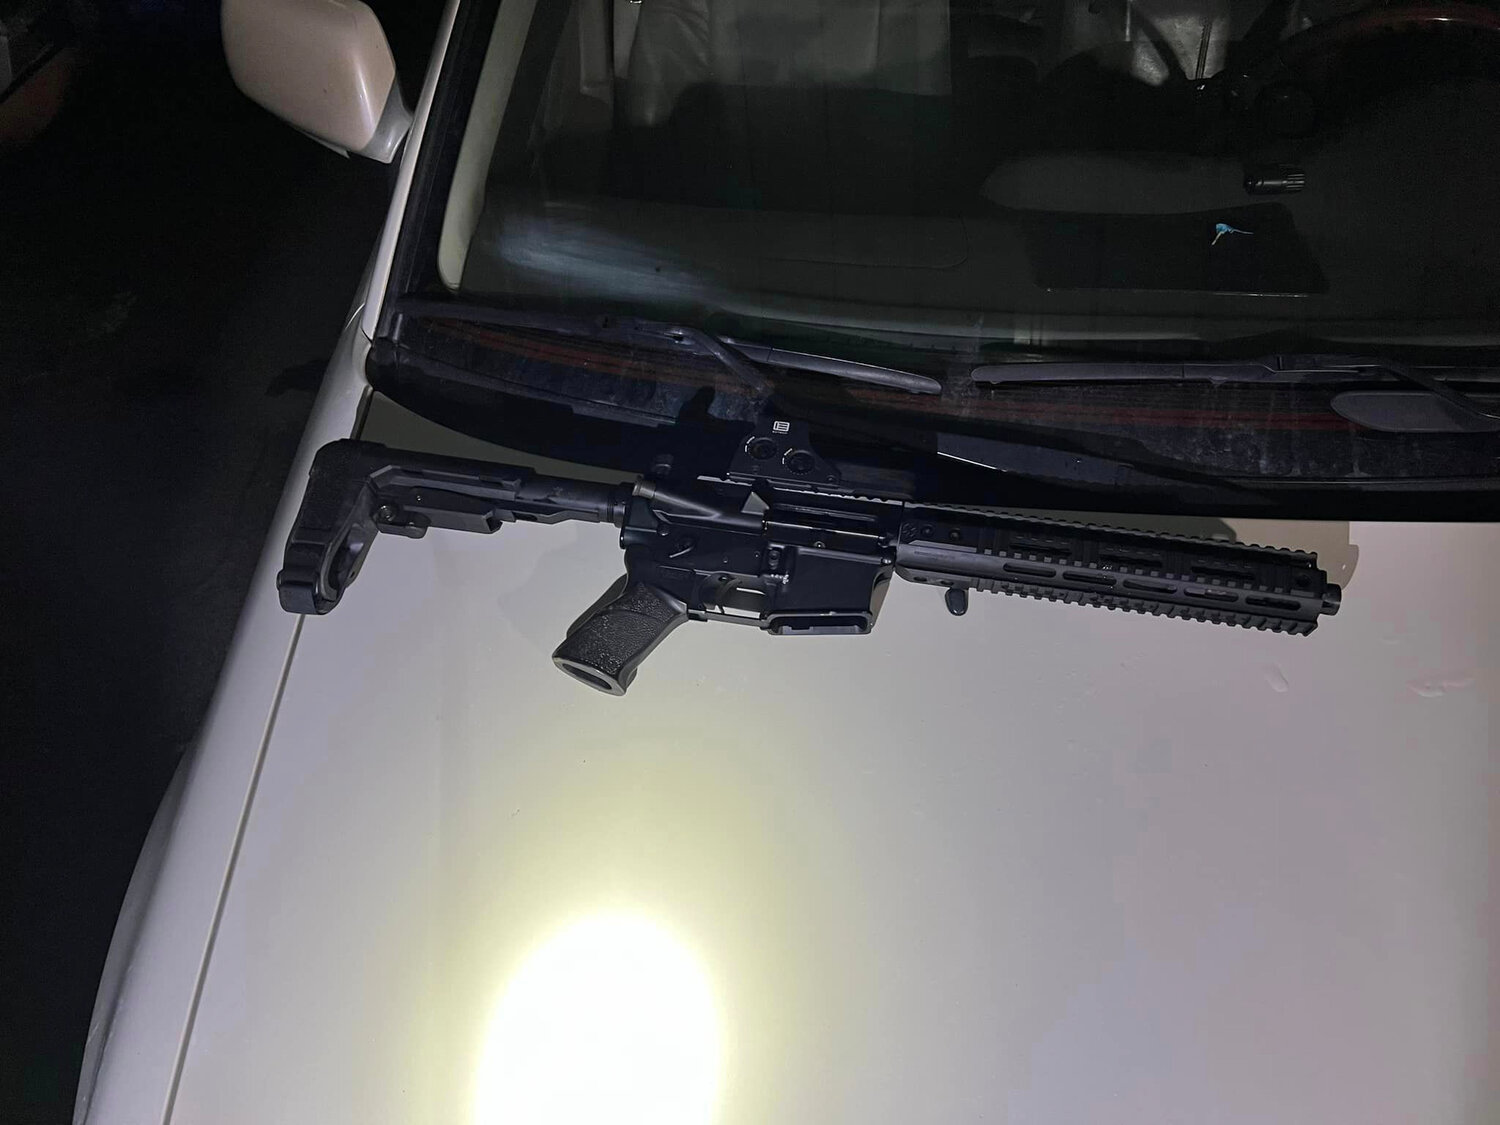 The suspect was armed with an AR-15, pictured here, as well as a holstered handgun and additional magazines.